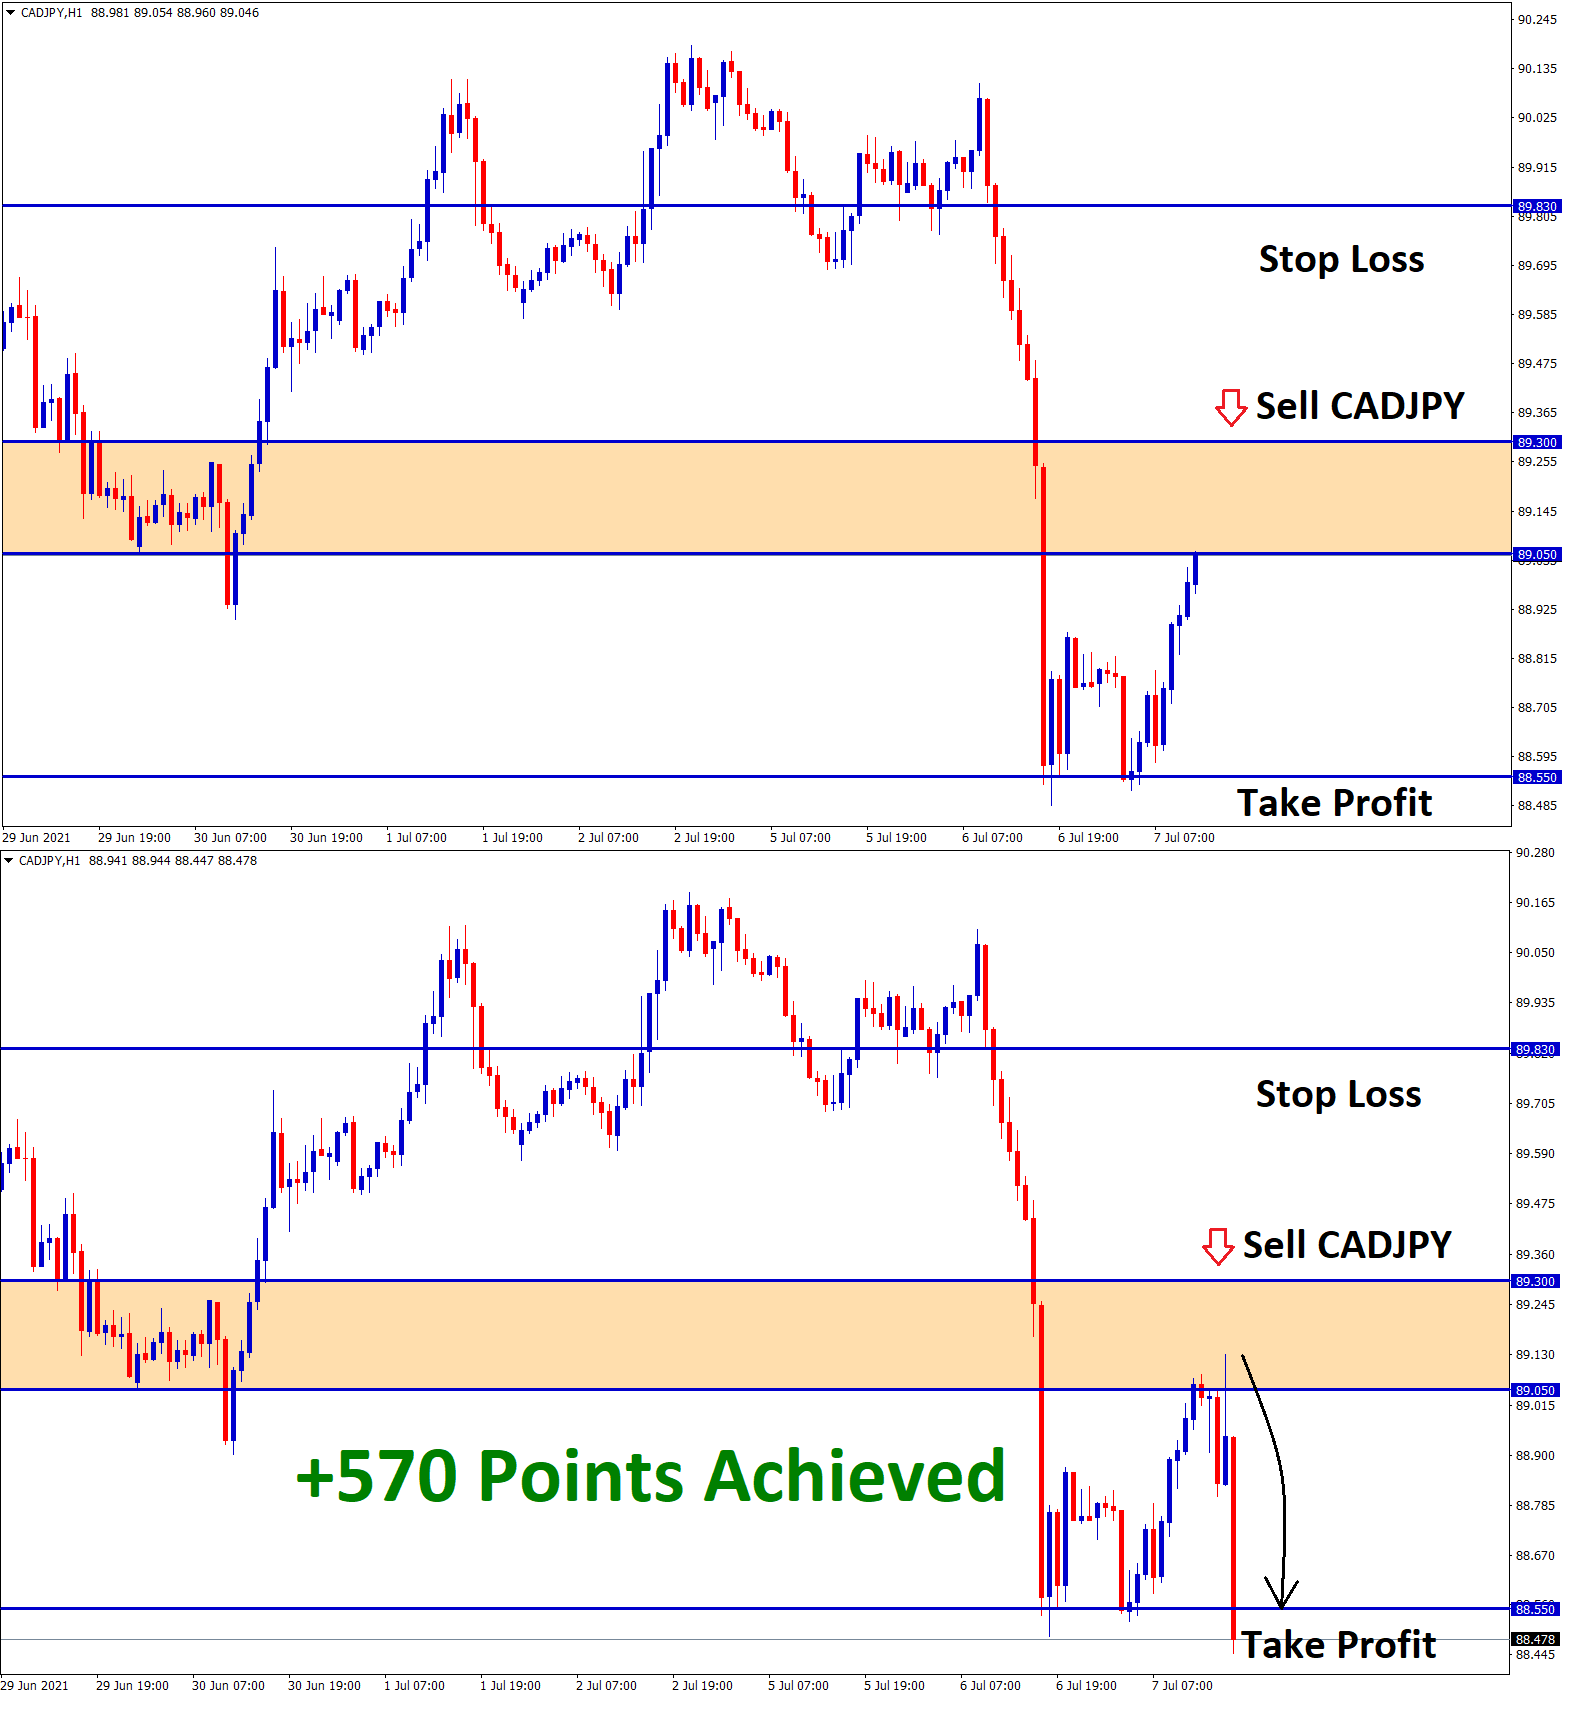 570 Points achieve in CADJPY sell signal